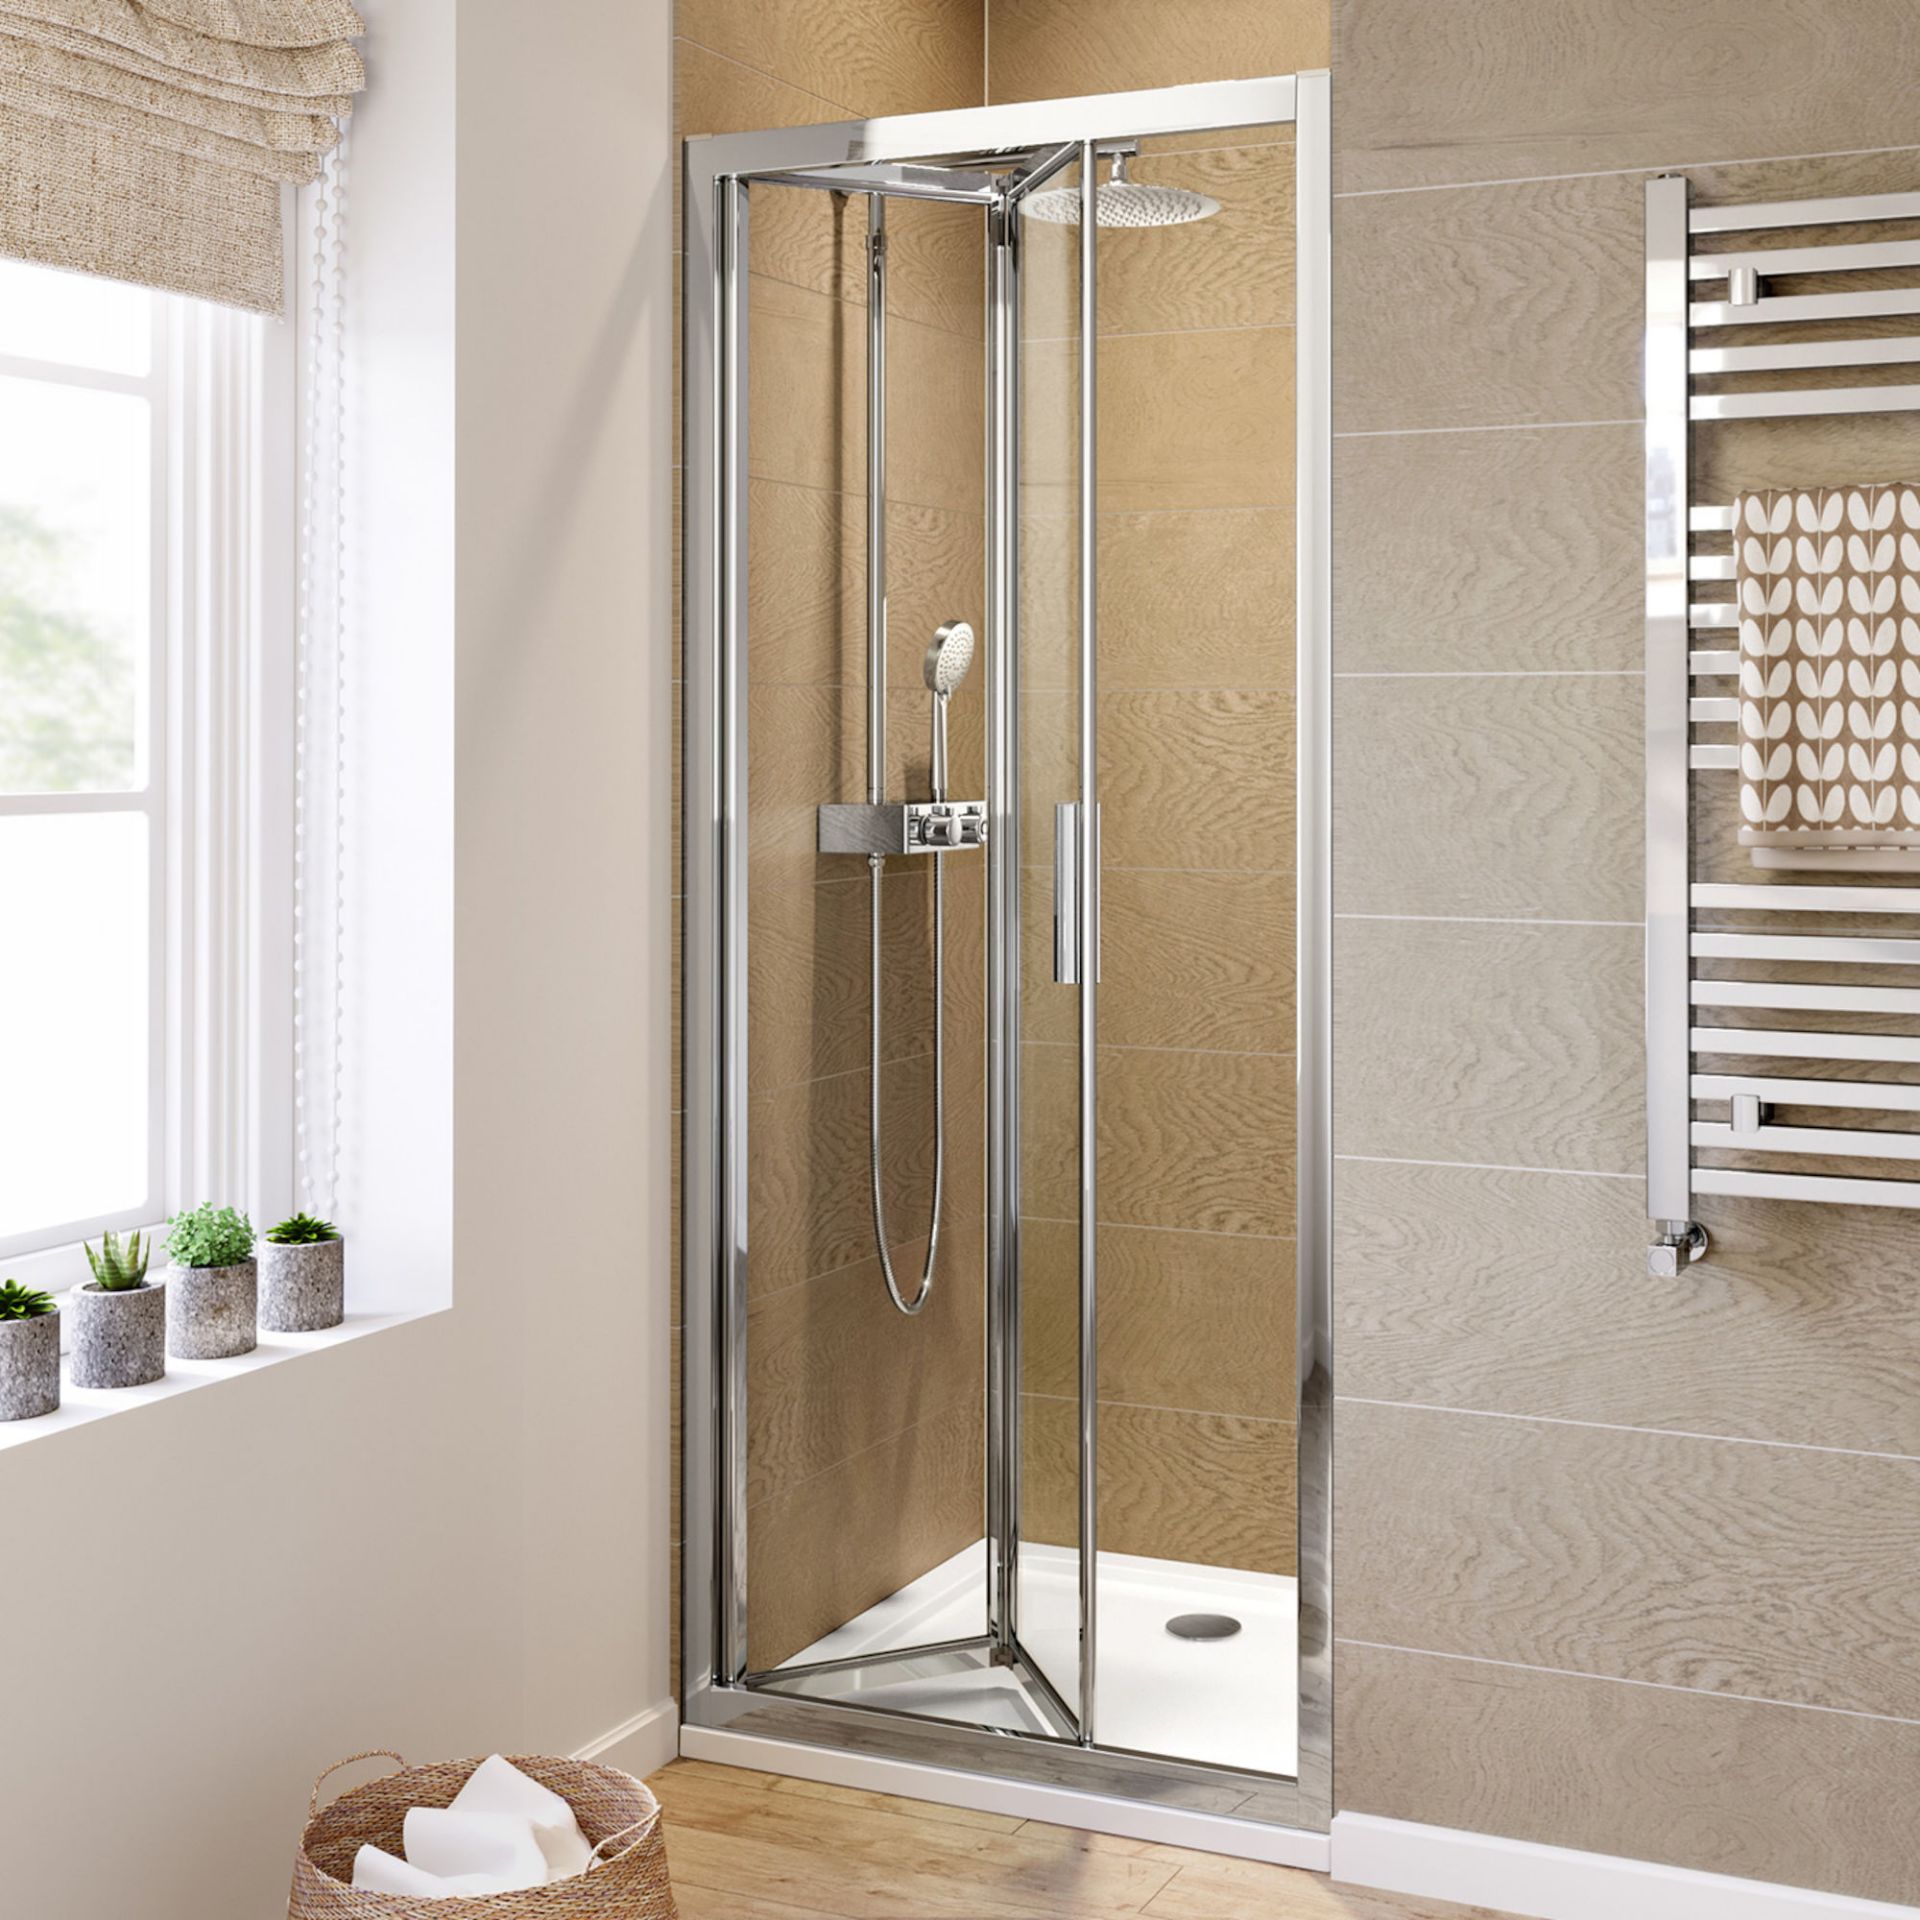 (PM33) 900mm - 6mm Elements EasyClean Bifold Shower Door. RRP £299.99. We love this because B...